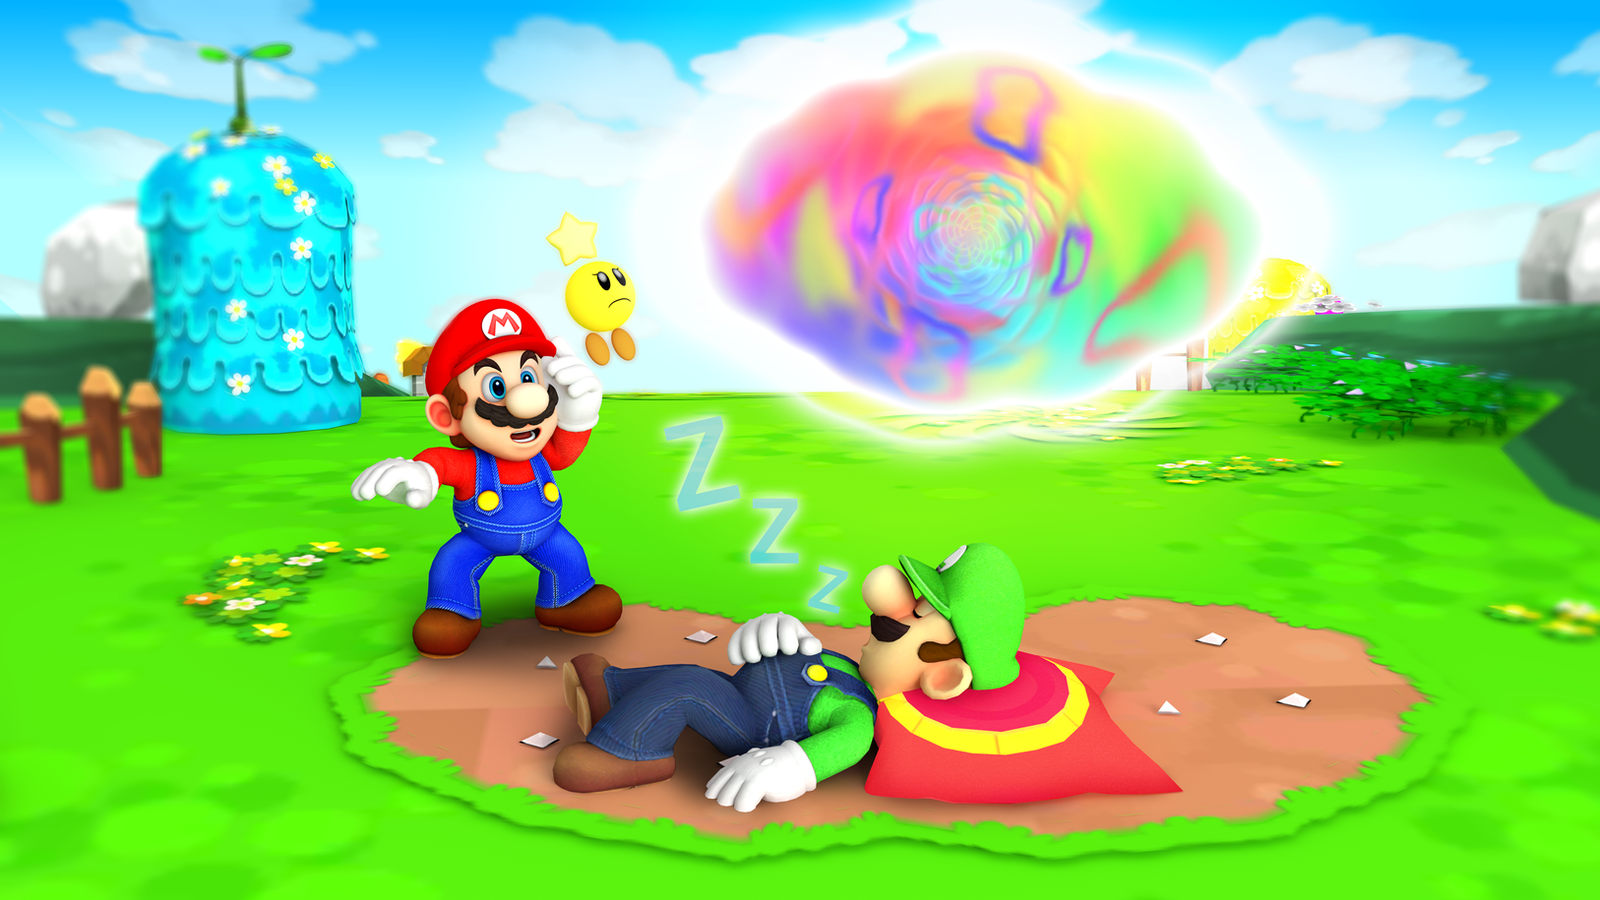 mario_and_luigi__dream_team_hd_by_fawfulthegreat64-dc8z25o.png